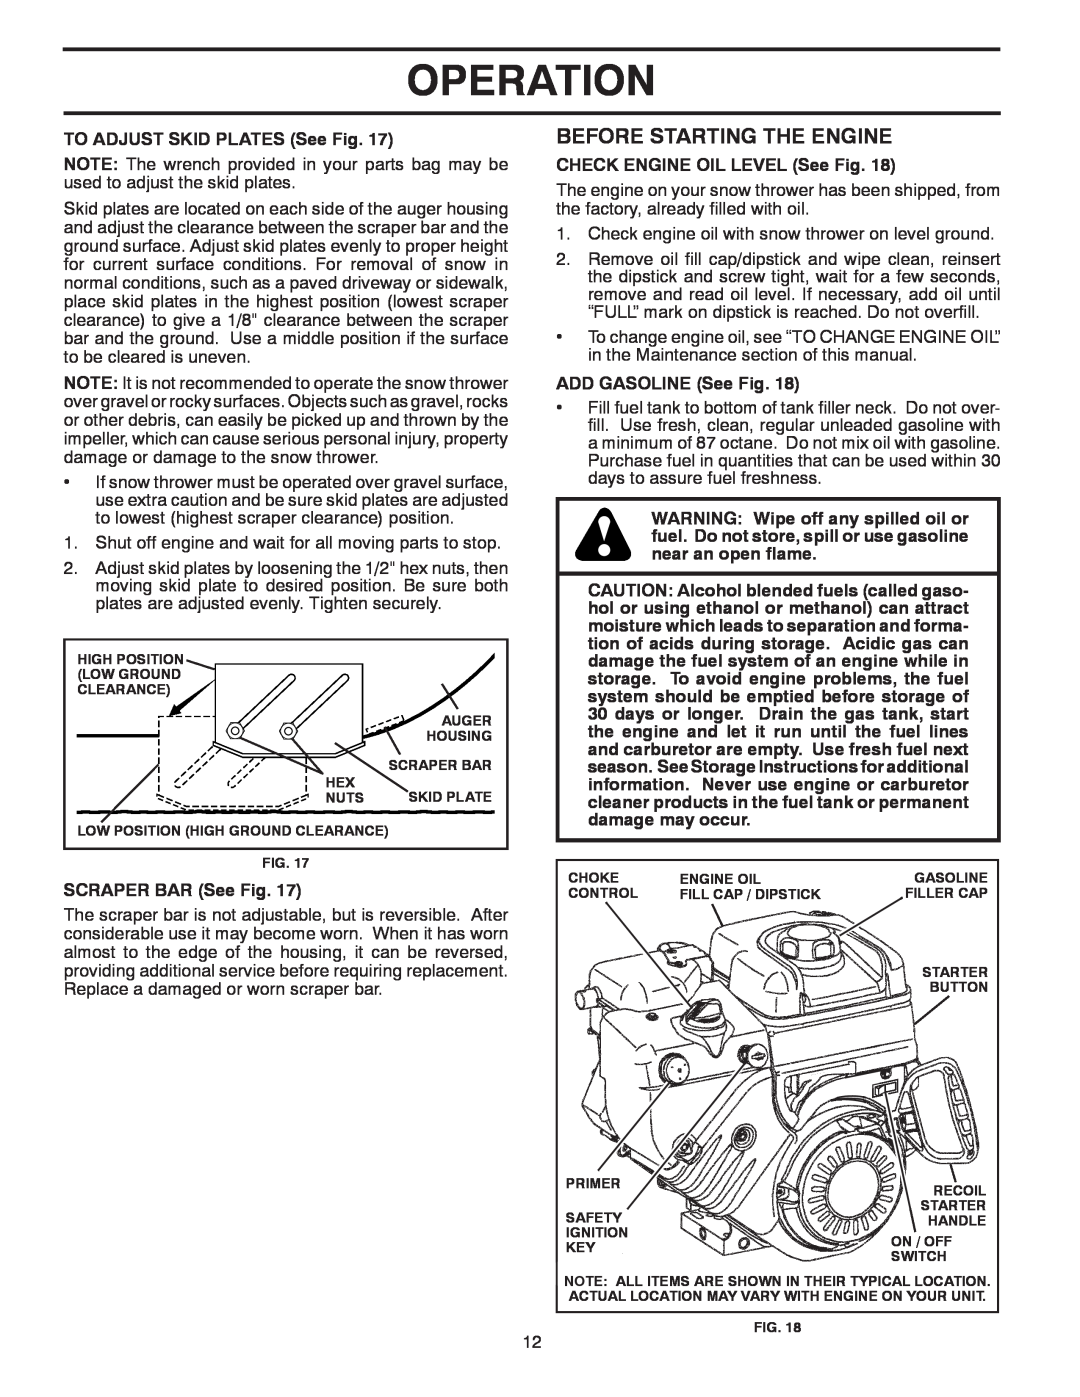 Poulan 421916 owner manual Before Starting The Engine, Operation, TO ADJUST SKID PLATES See Fig, SCRAPER BAR See Fig 